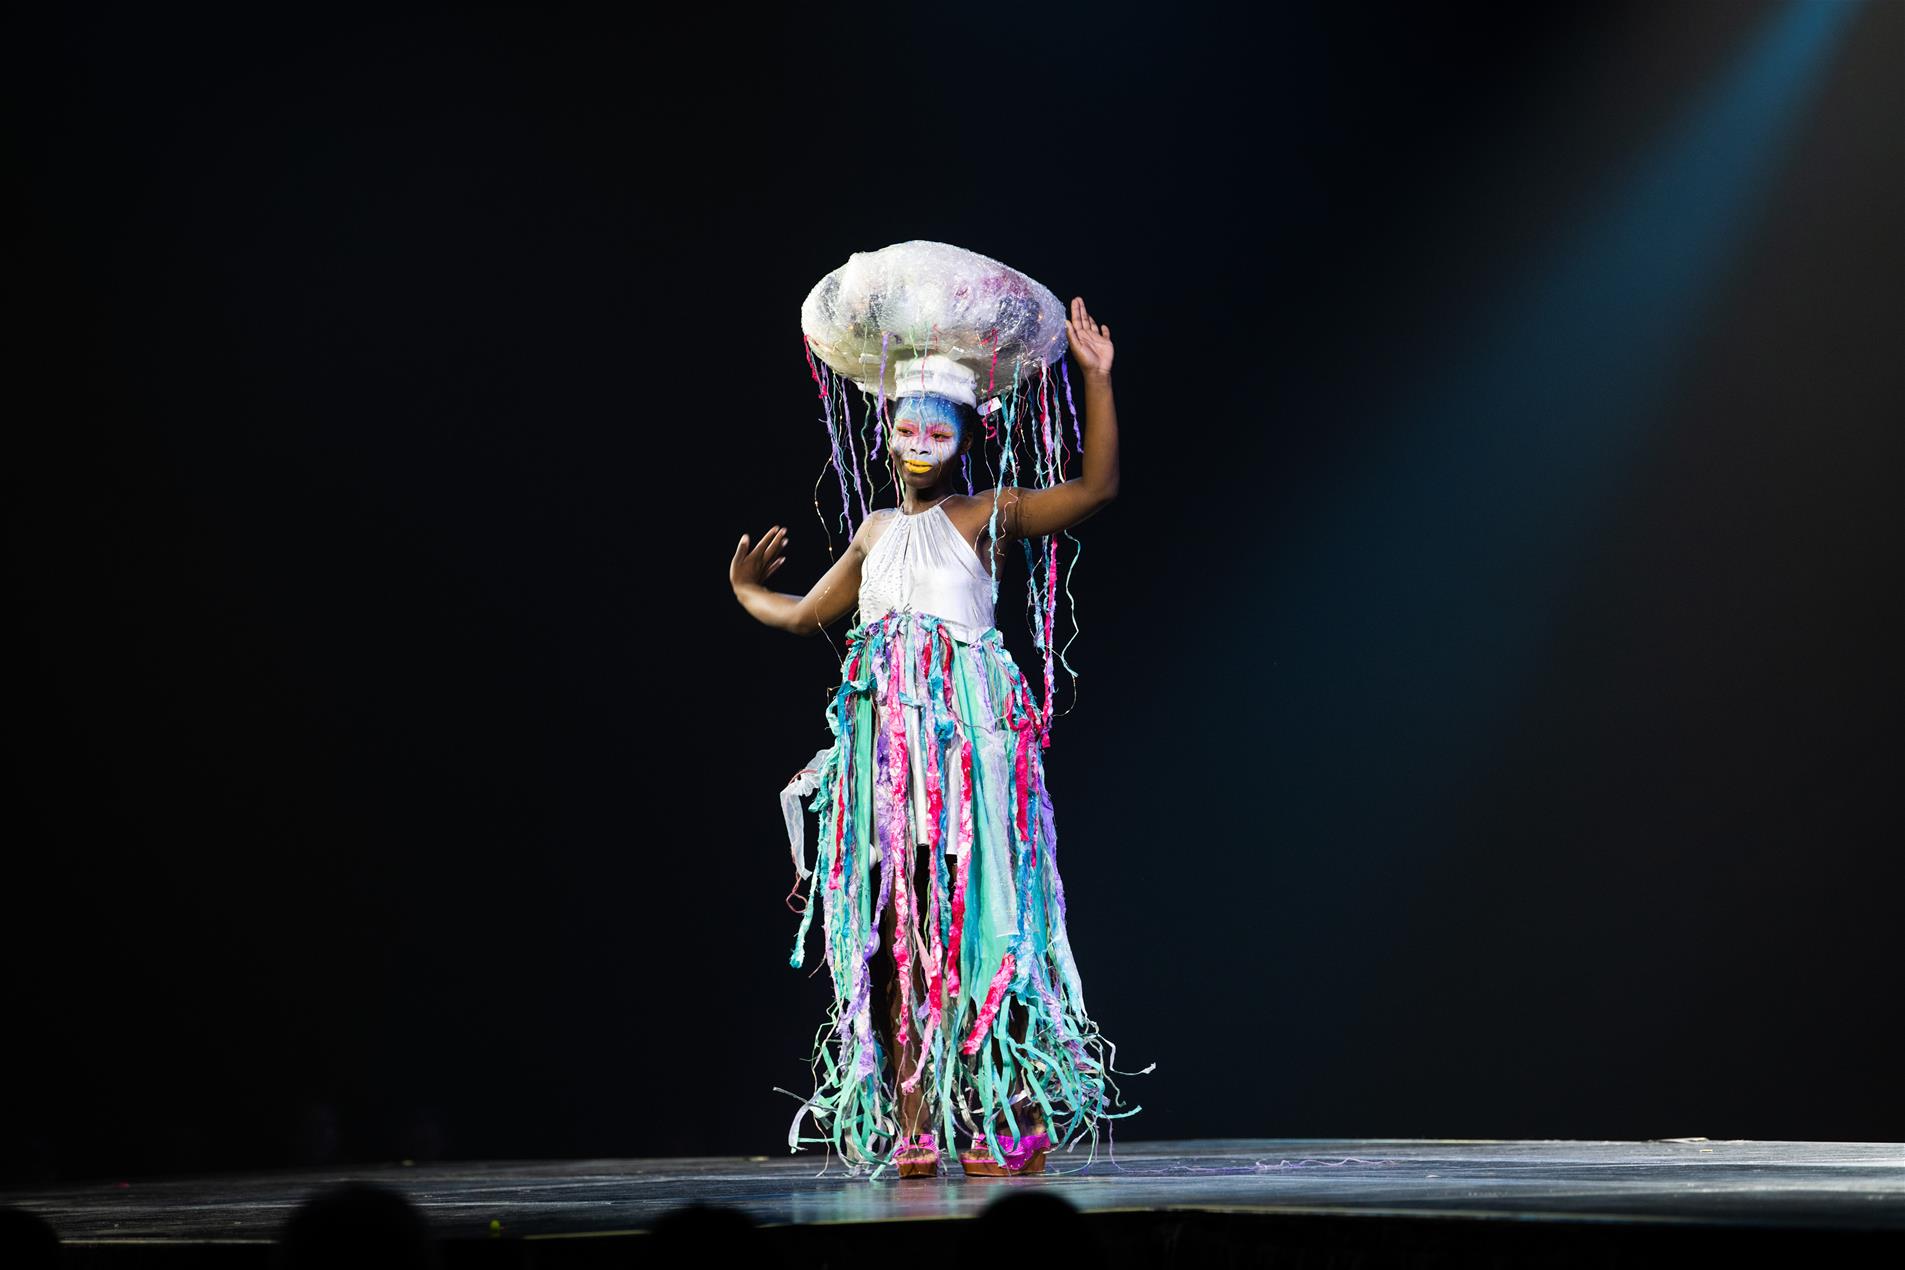 A model wearing colourful face paint and a vibrant dress on stage.